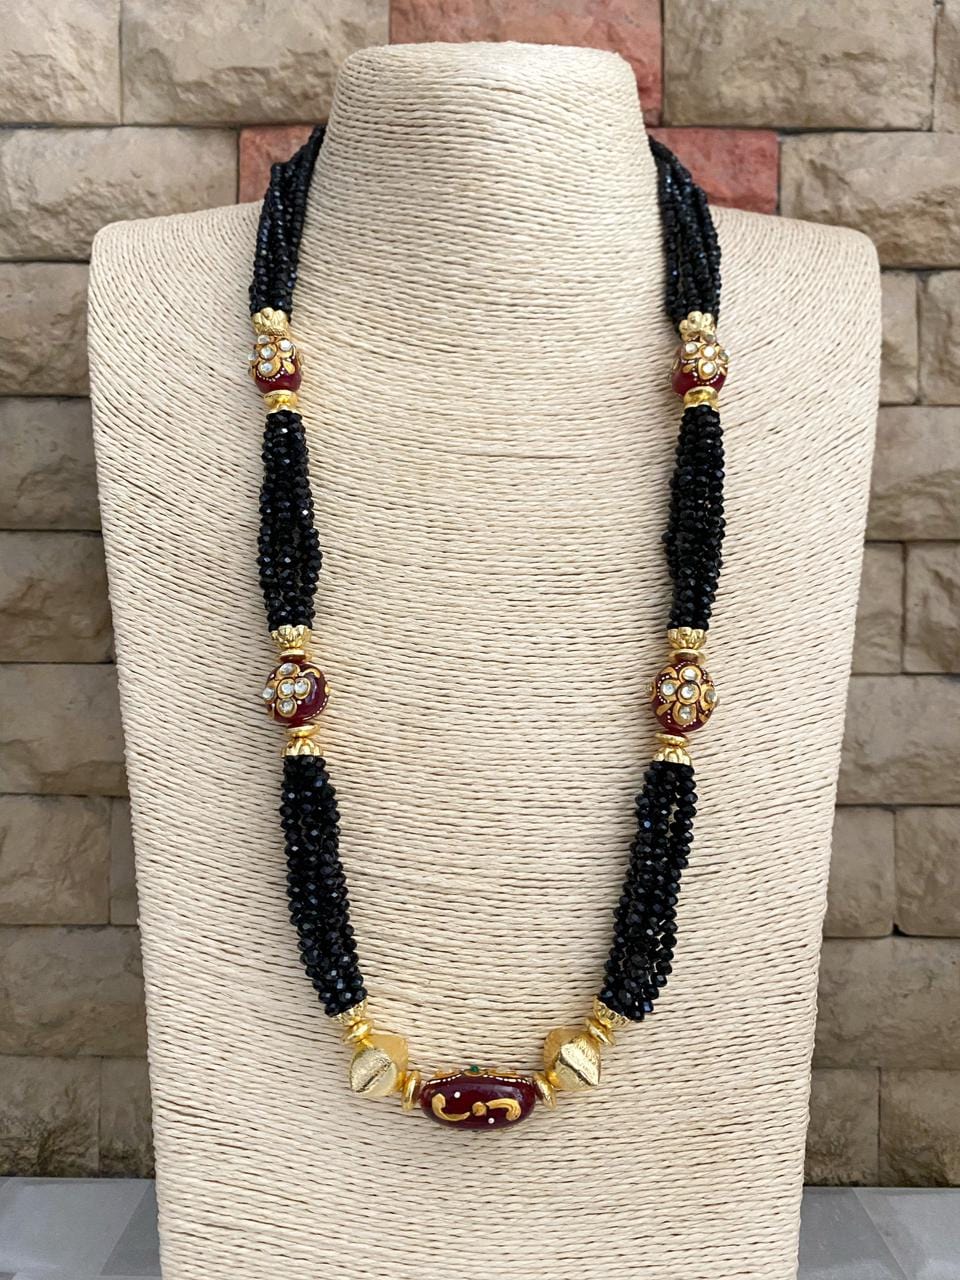 Designer Handcrafted Long Black Crystal Beaded Necklace Set By Gehna Shop Beads Jewellery